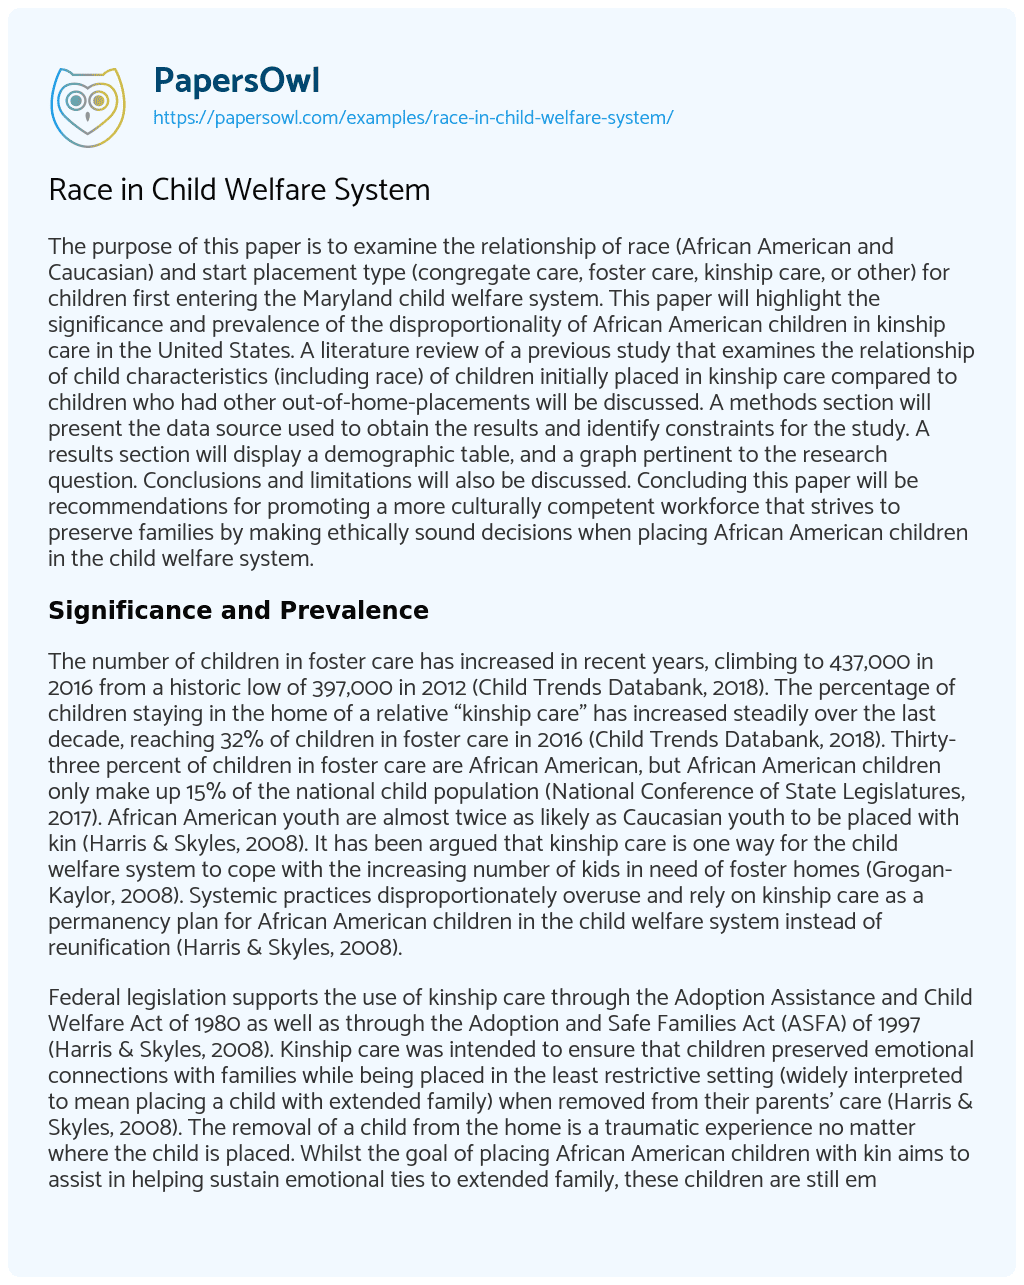 Race in Child Welfare System essay